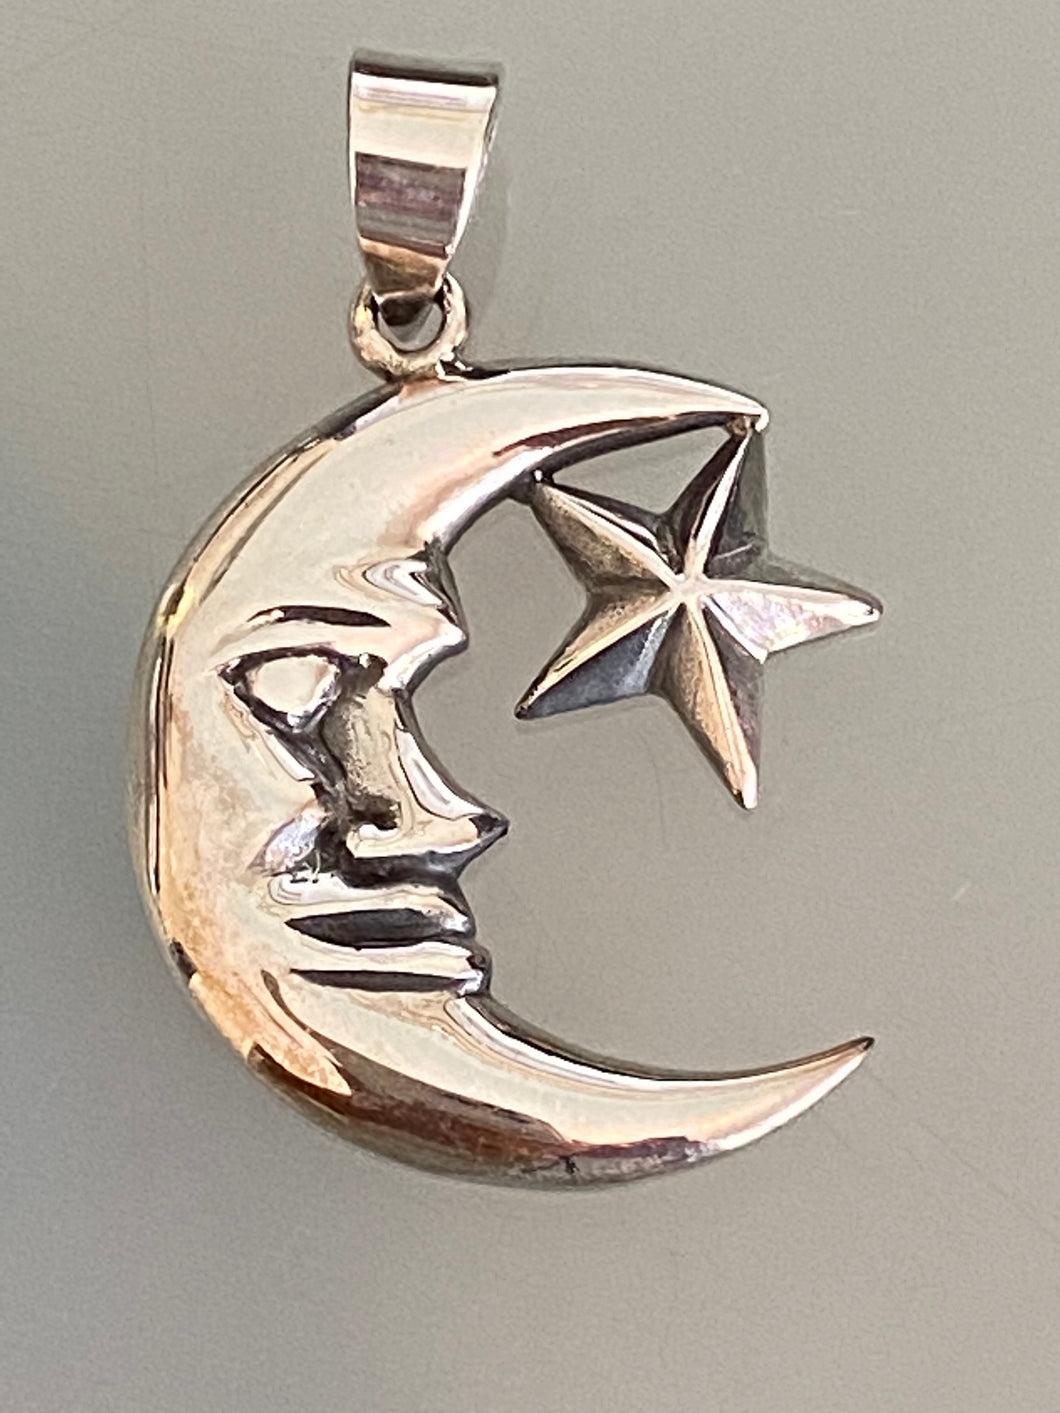 Moon & Star Pendant 925 Sterling Silver Jewelry. Free Silver Plated Chain. Free Shipping!